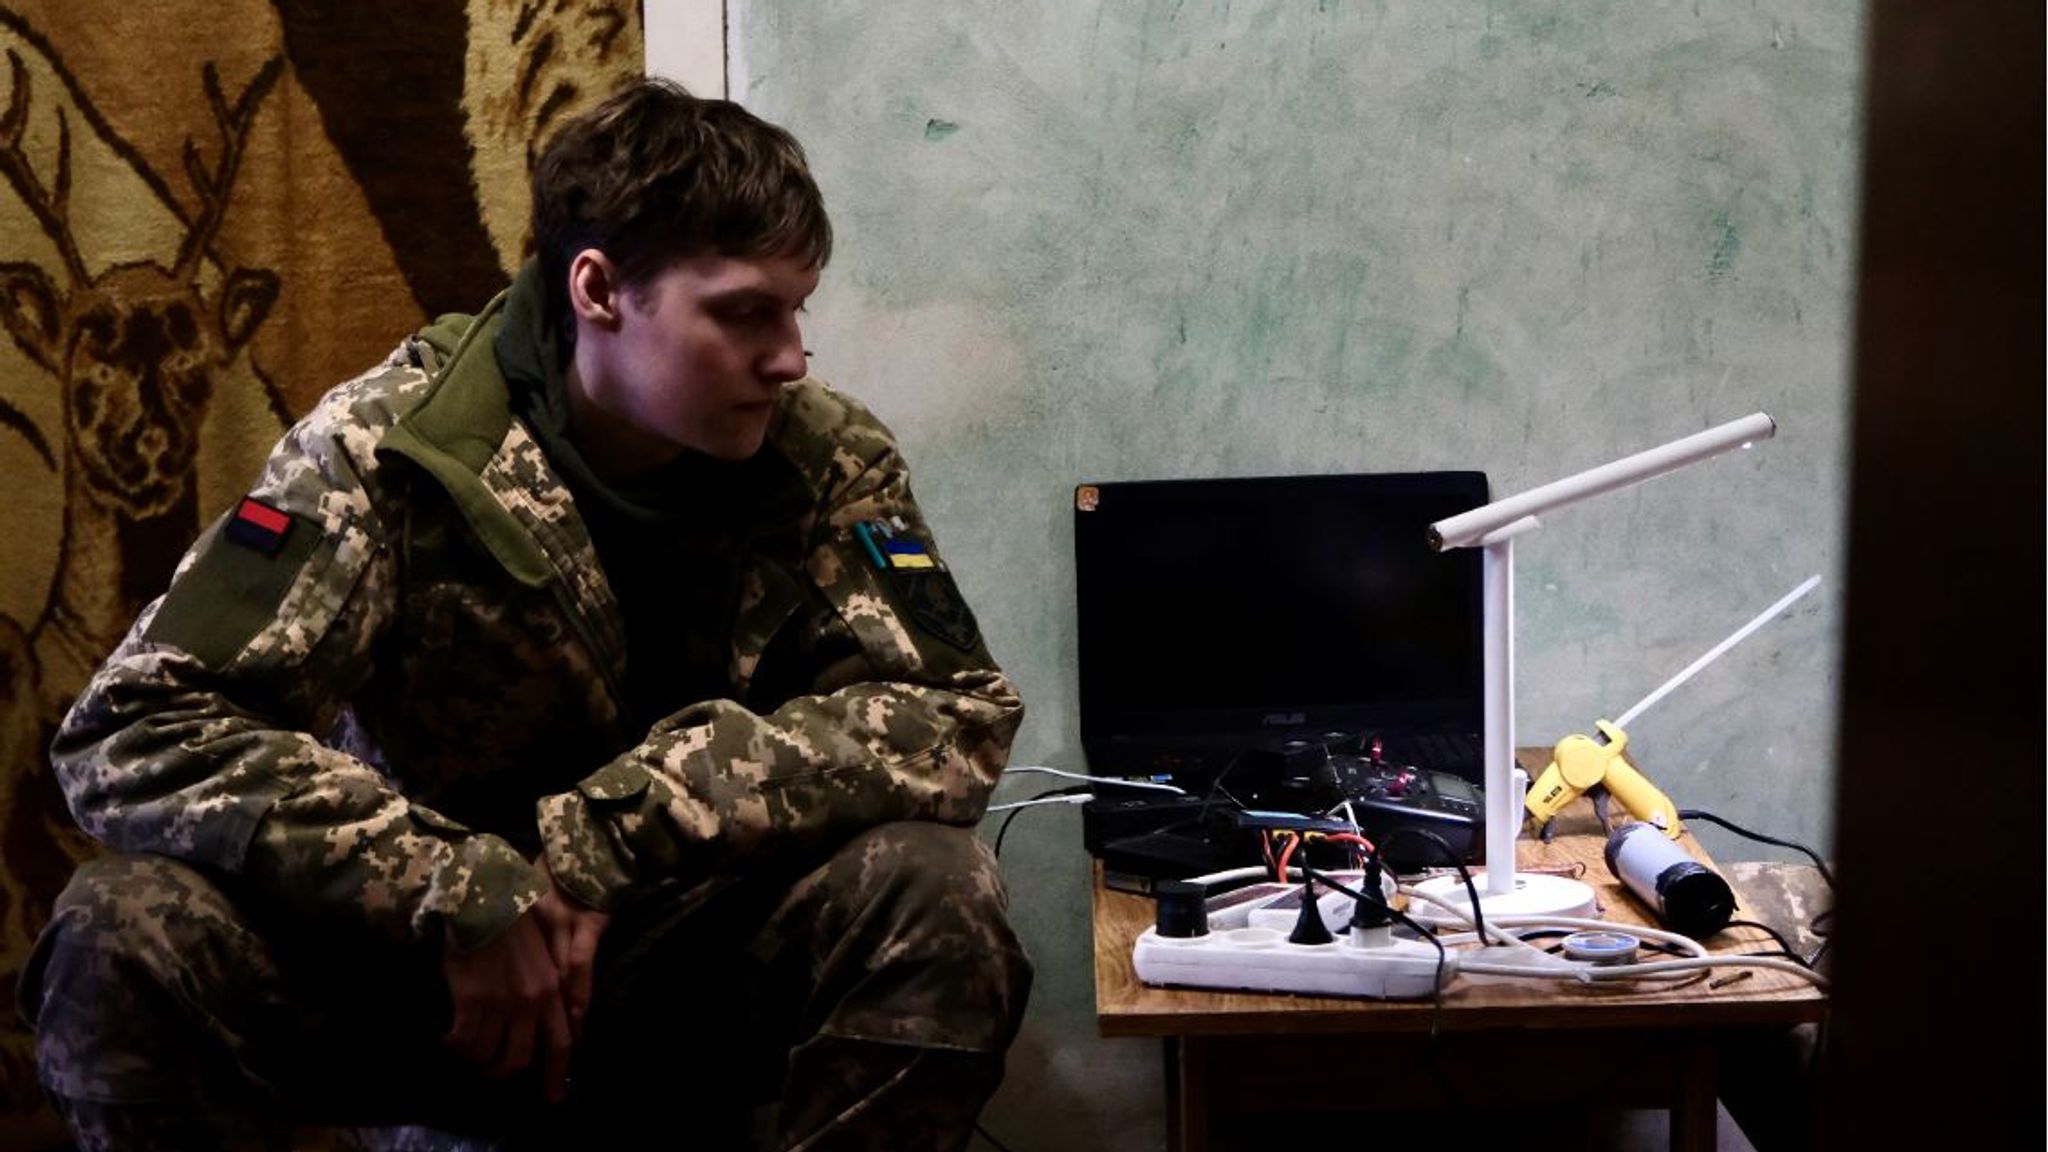 Young Ukrainians risking their lives building deadly kamikaze drones to hunt down and kill Russian soldiers